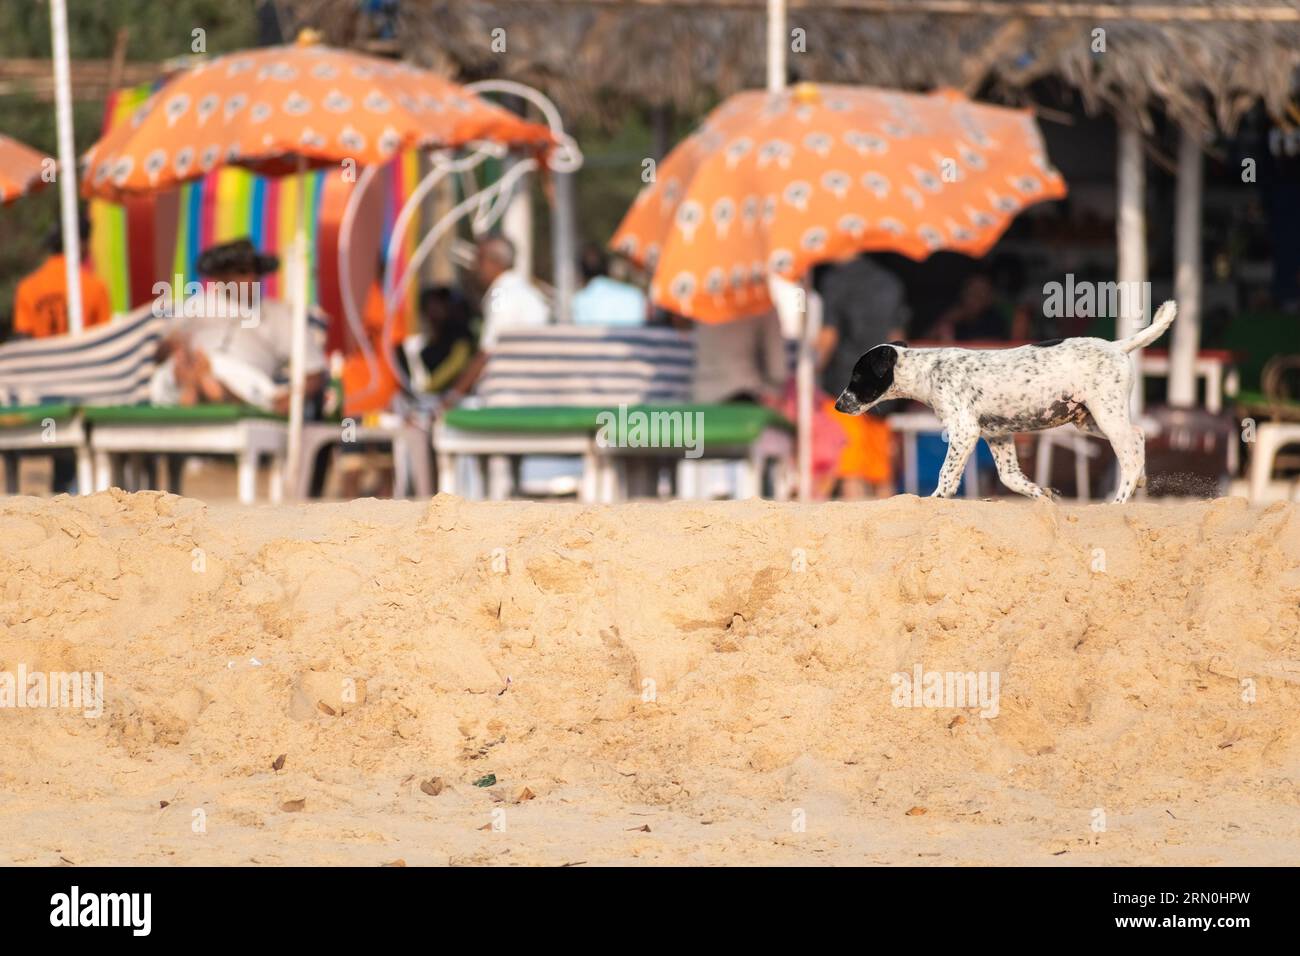 Calangute, Goa, India - January 2023: A puppy dog walking on a beach with colorful shacks in Goa. Stock Photo